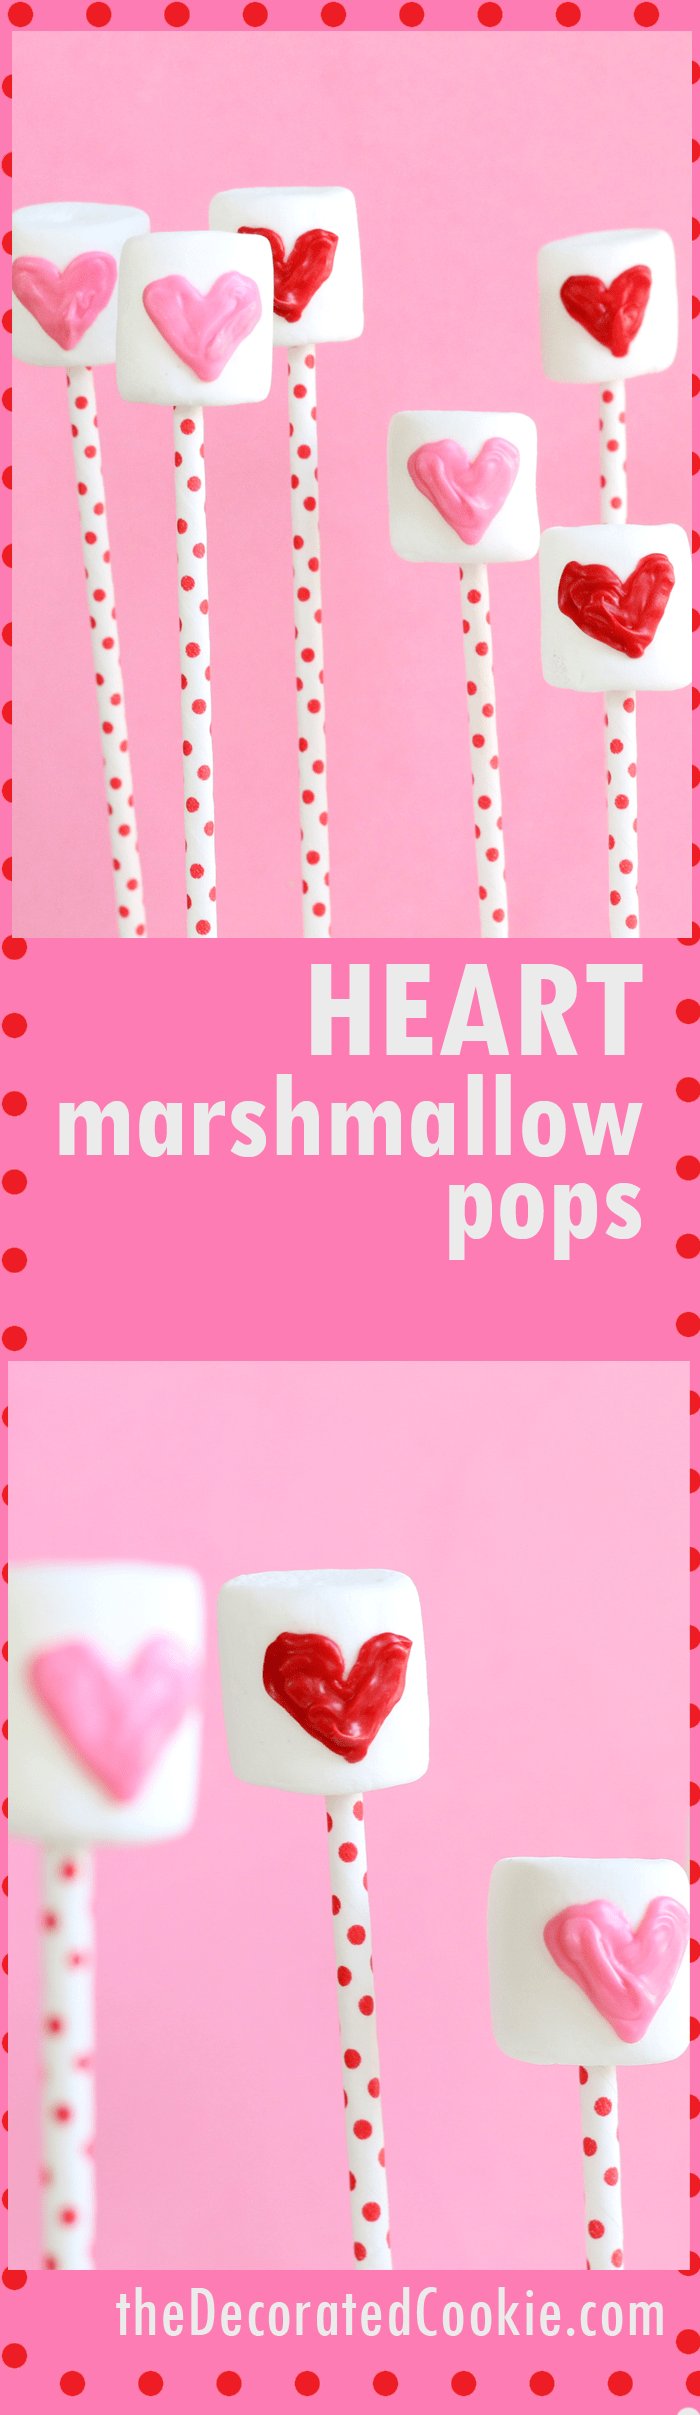 heart marshmallow pops for Valentine's Day 